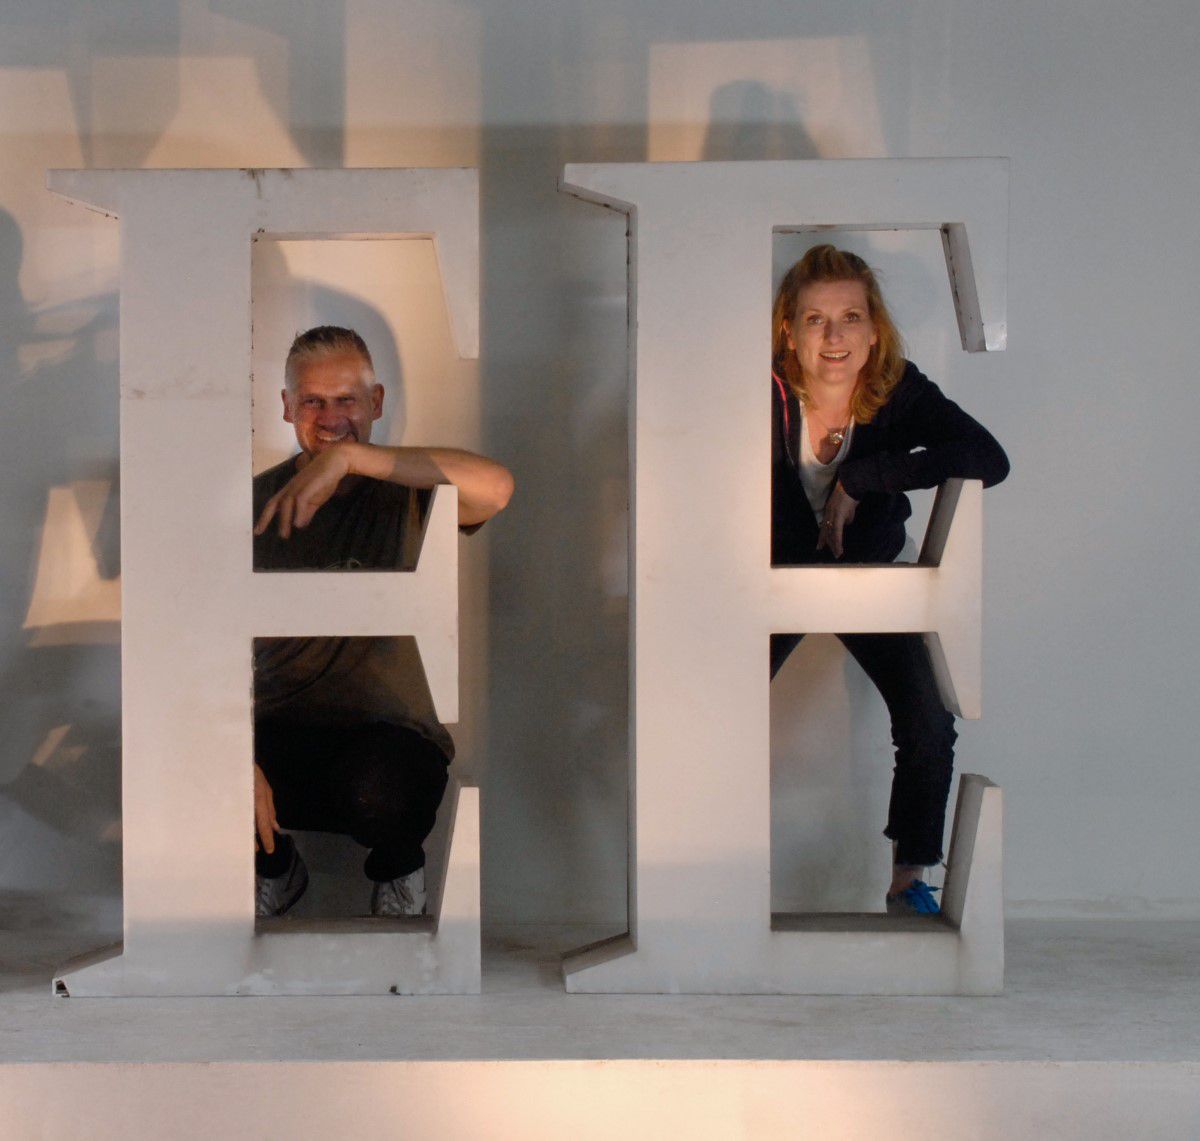 Buchstabenmuseum Berlin, Museum of Letters, Till Kaposty-Bliss and Barbara Dechant behind two big letters